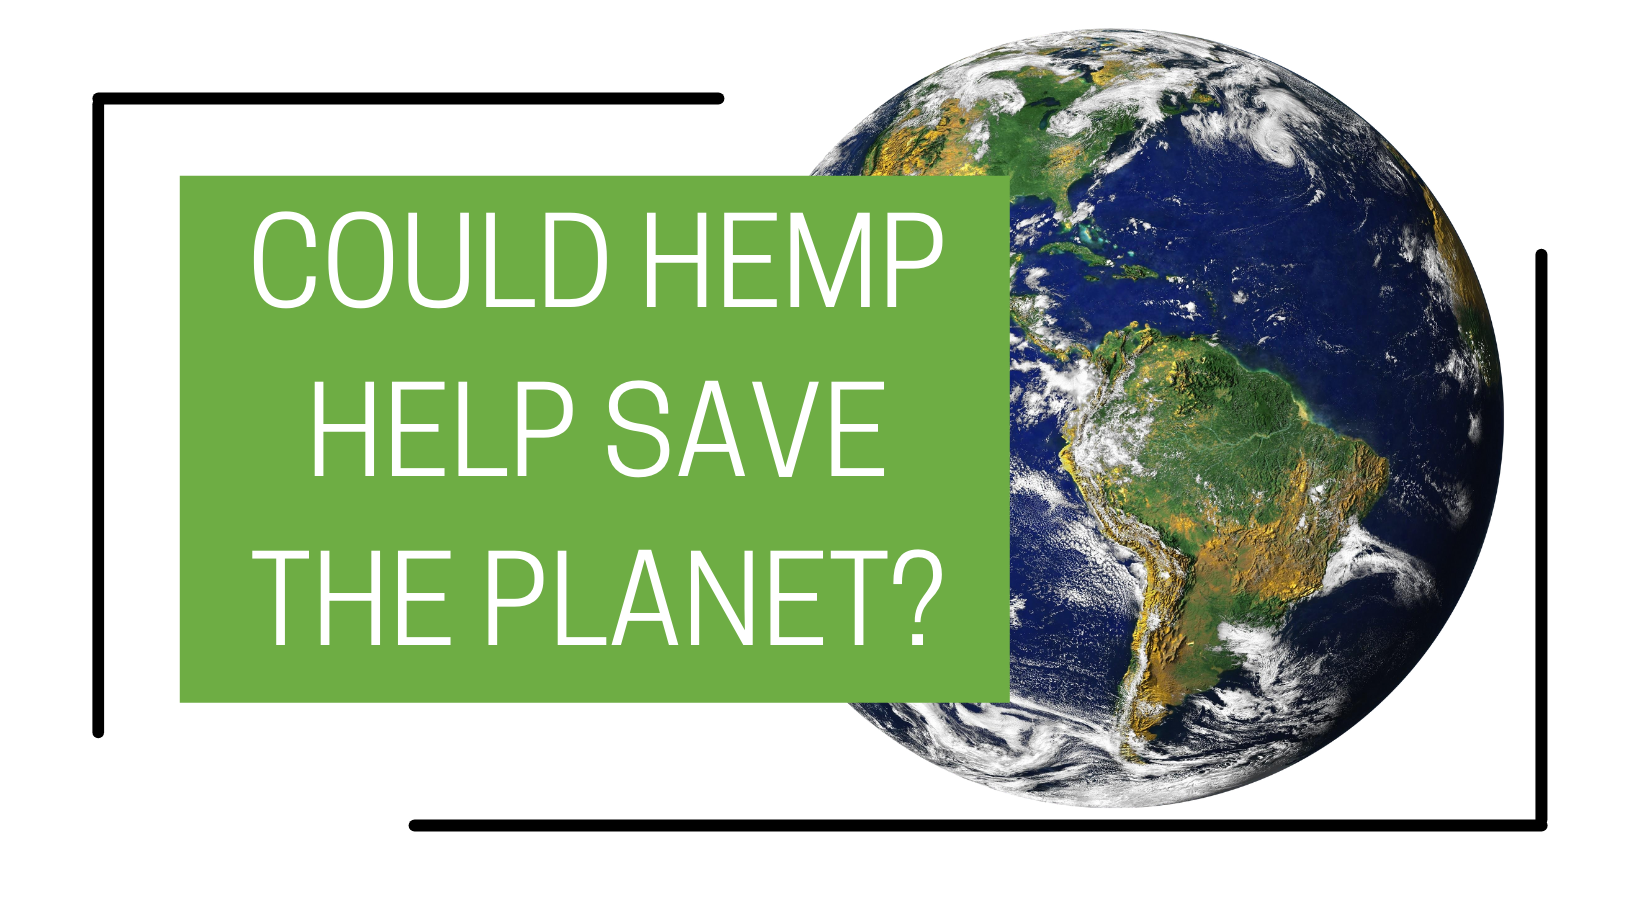 the earth contained within a detached frame with a green box containing the title of the blog, could hemp help save the planet?